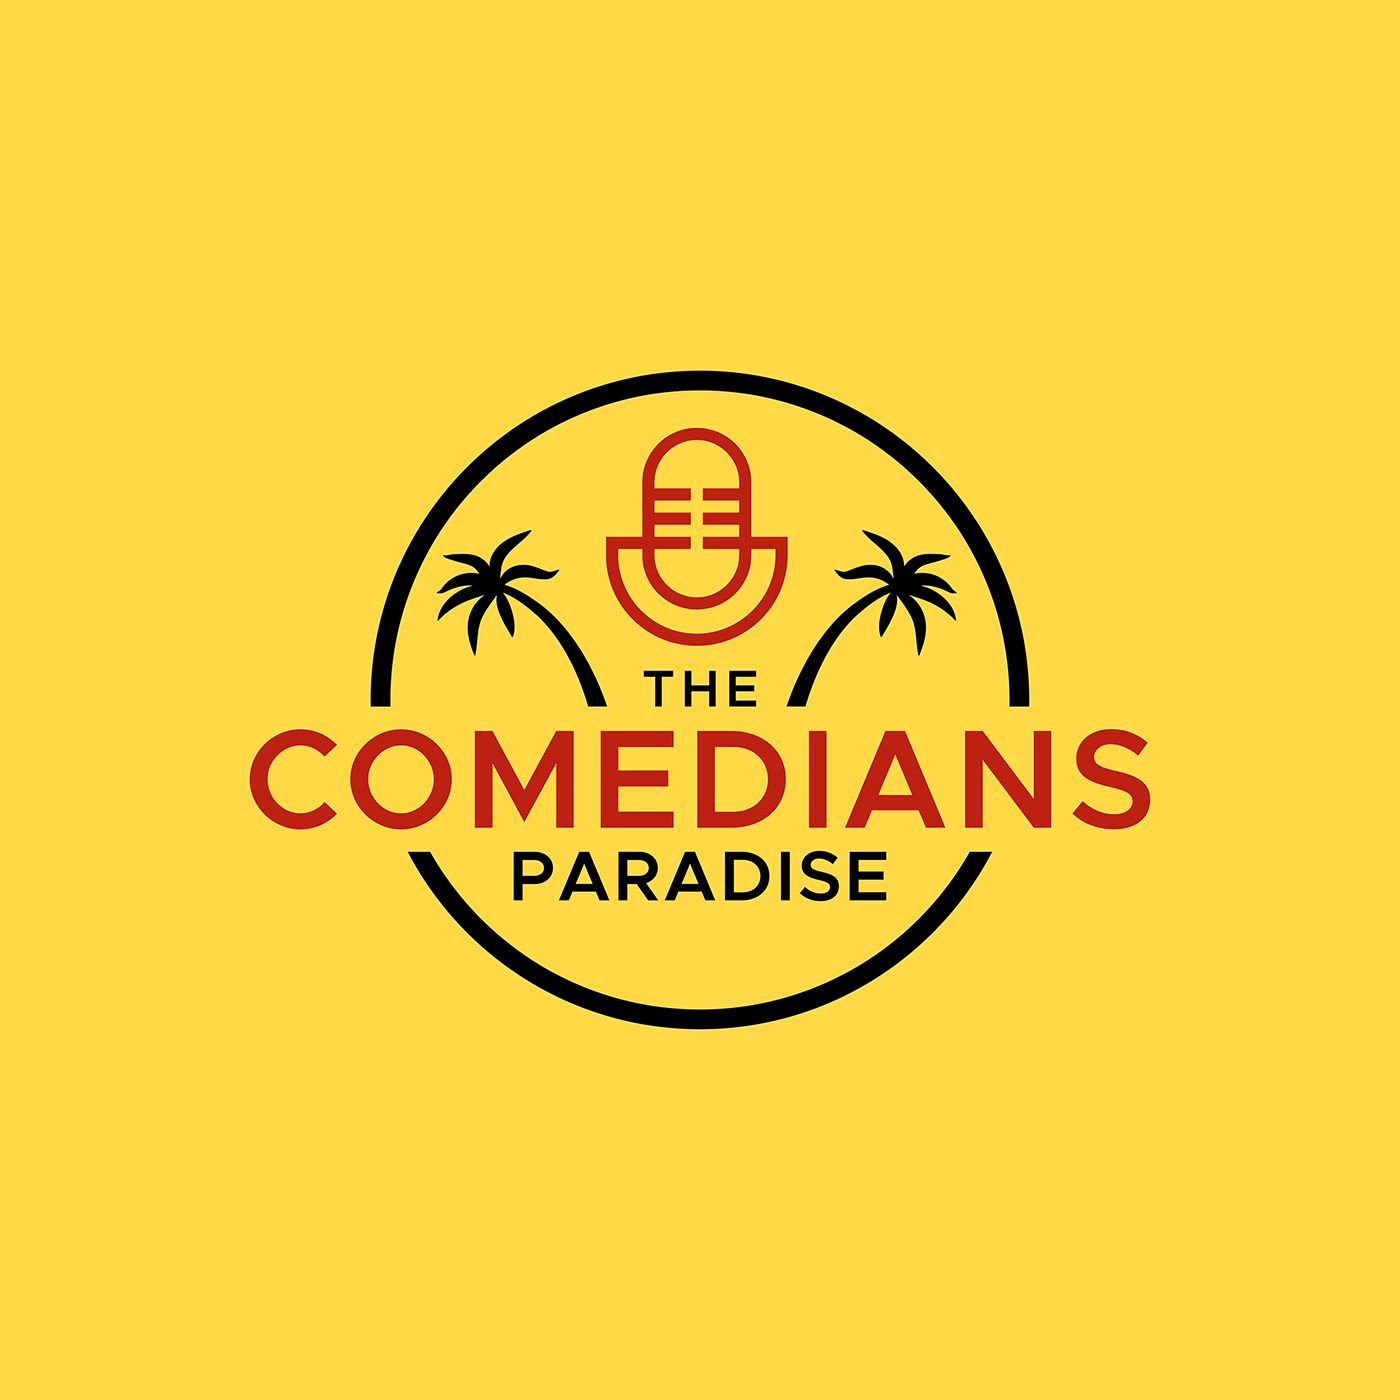 Show artwork for The comedians paradise